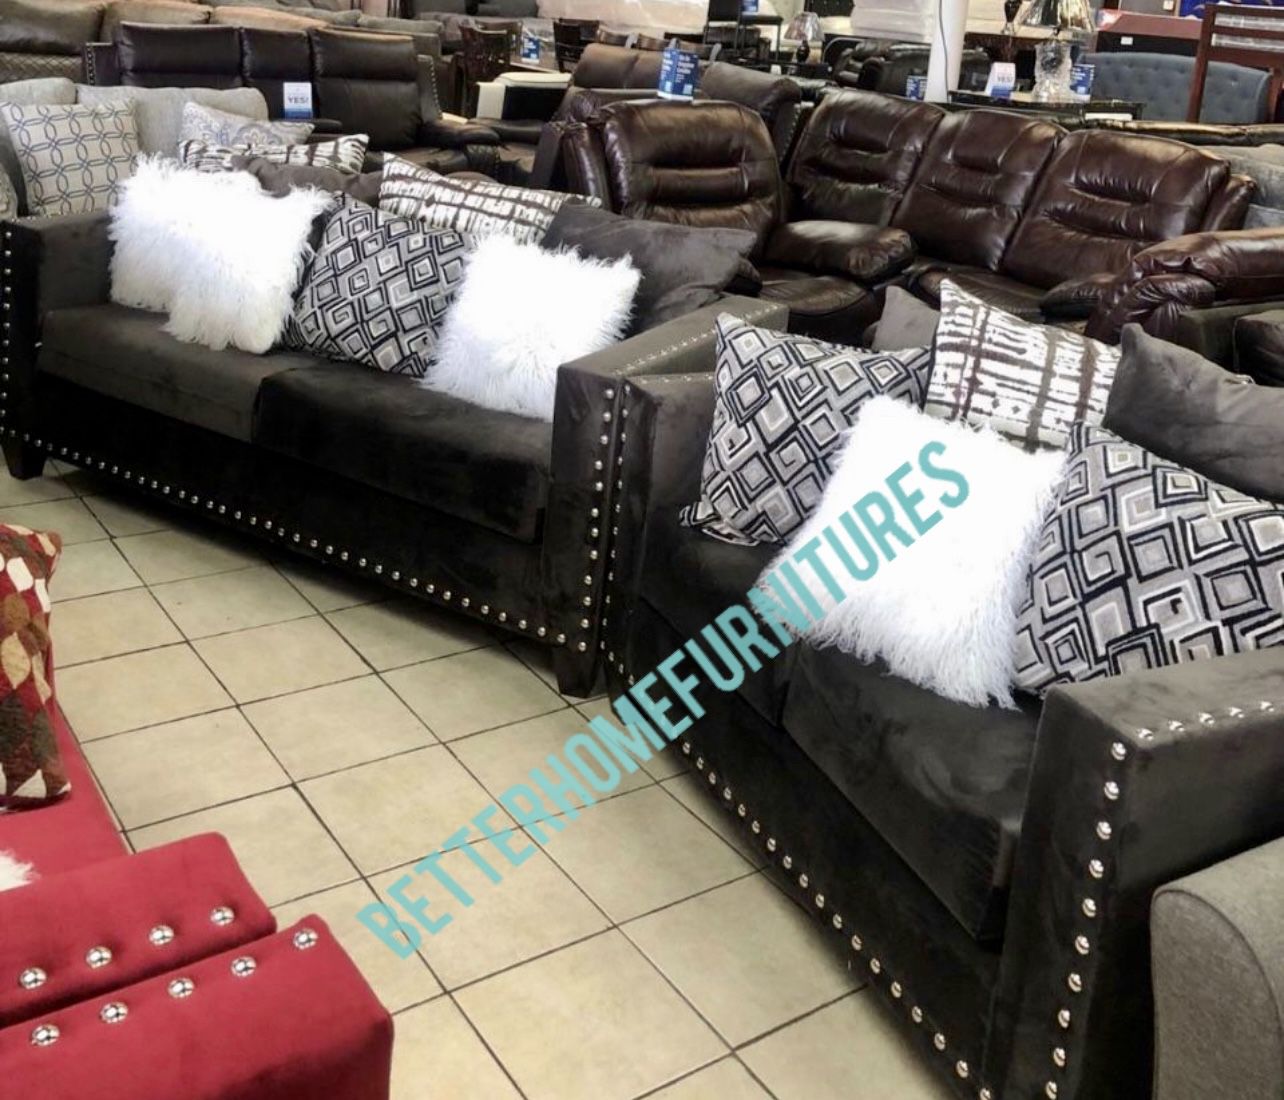 New sectional in box- $0 interest Finance available- shop now pay later.